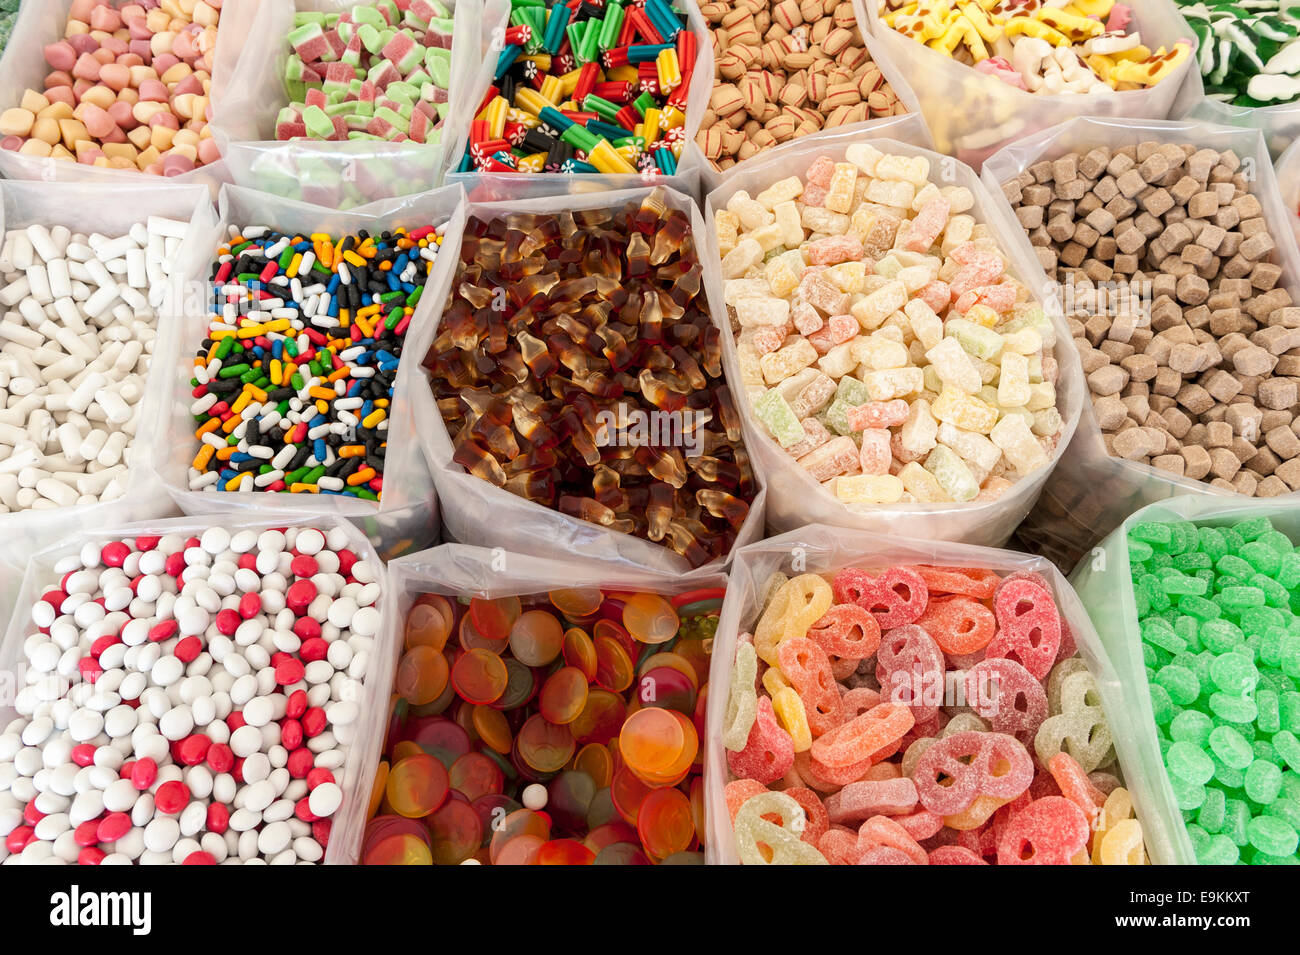 Closeup of sweets in open bags at a market in Amersfoort, Netherlands Stock Photo